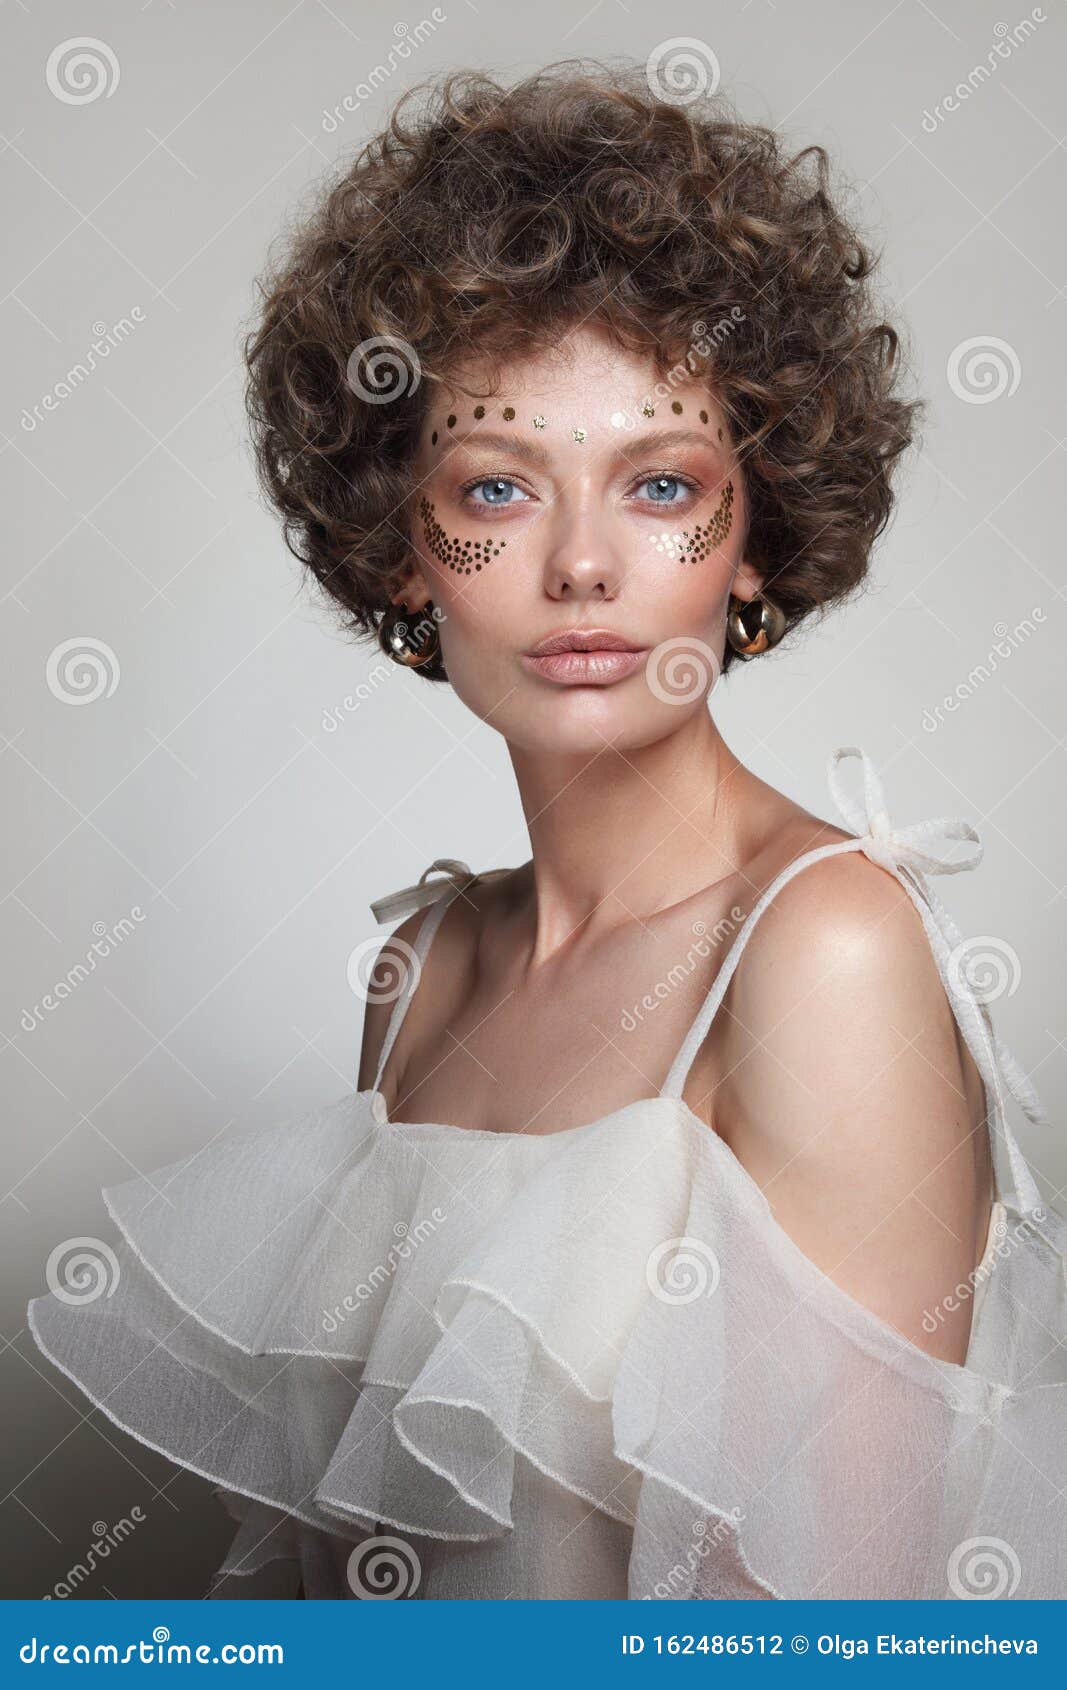 22 272 Vintage Photo Curly Hair Photos Free Royalty Free Stock Photos From Dreamstime